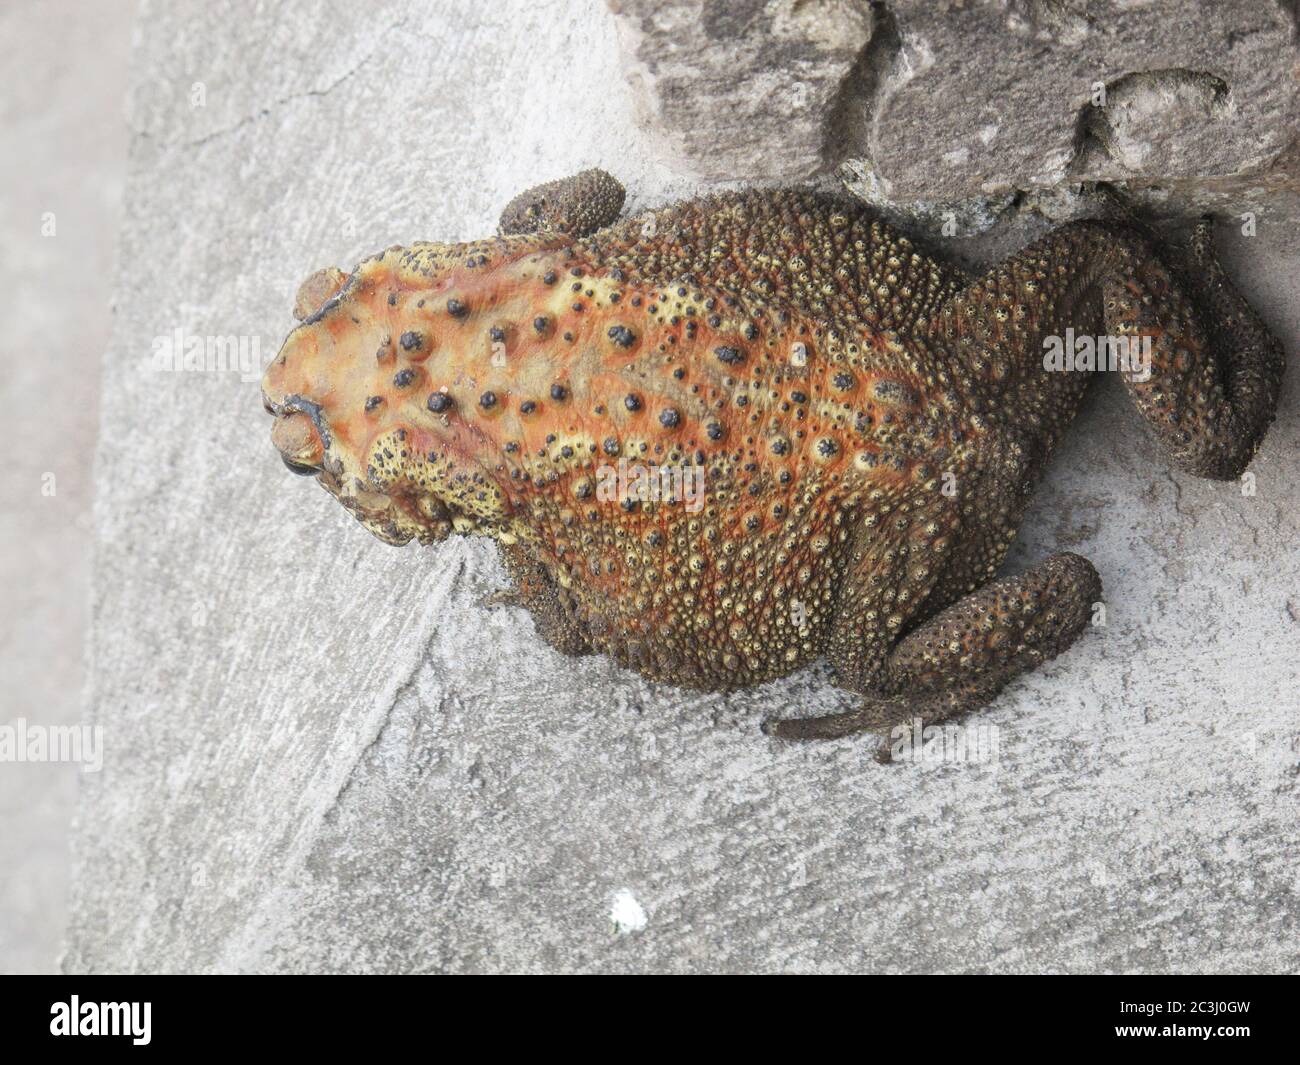 Toad is a common name for certain frogs, especially of the family Bufonidae. Texture of toad body. Stock Photo